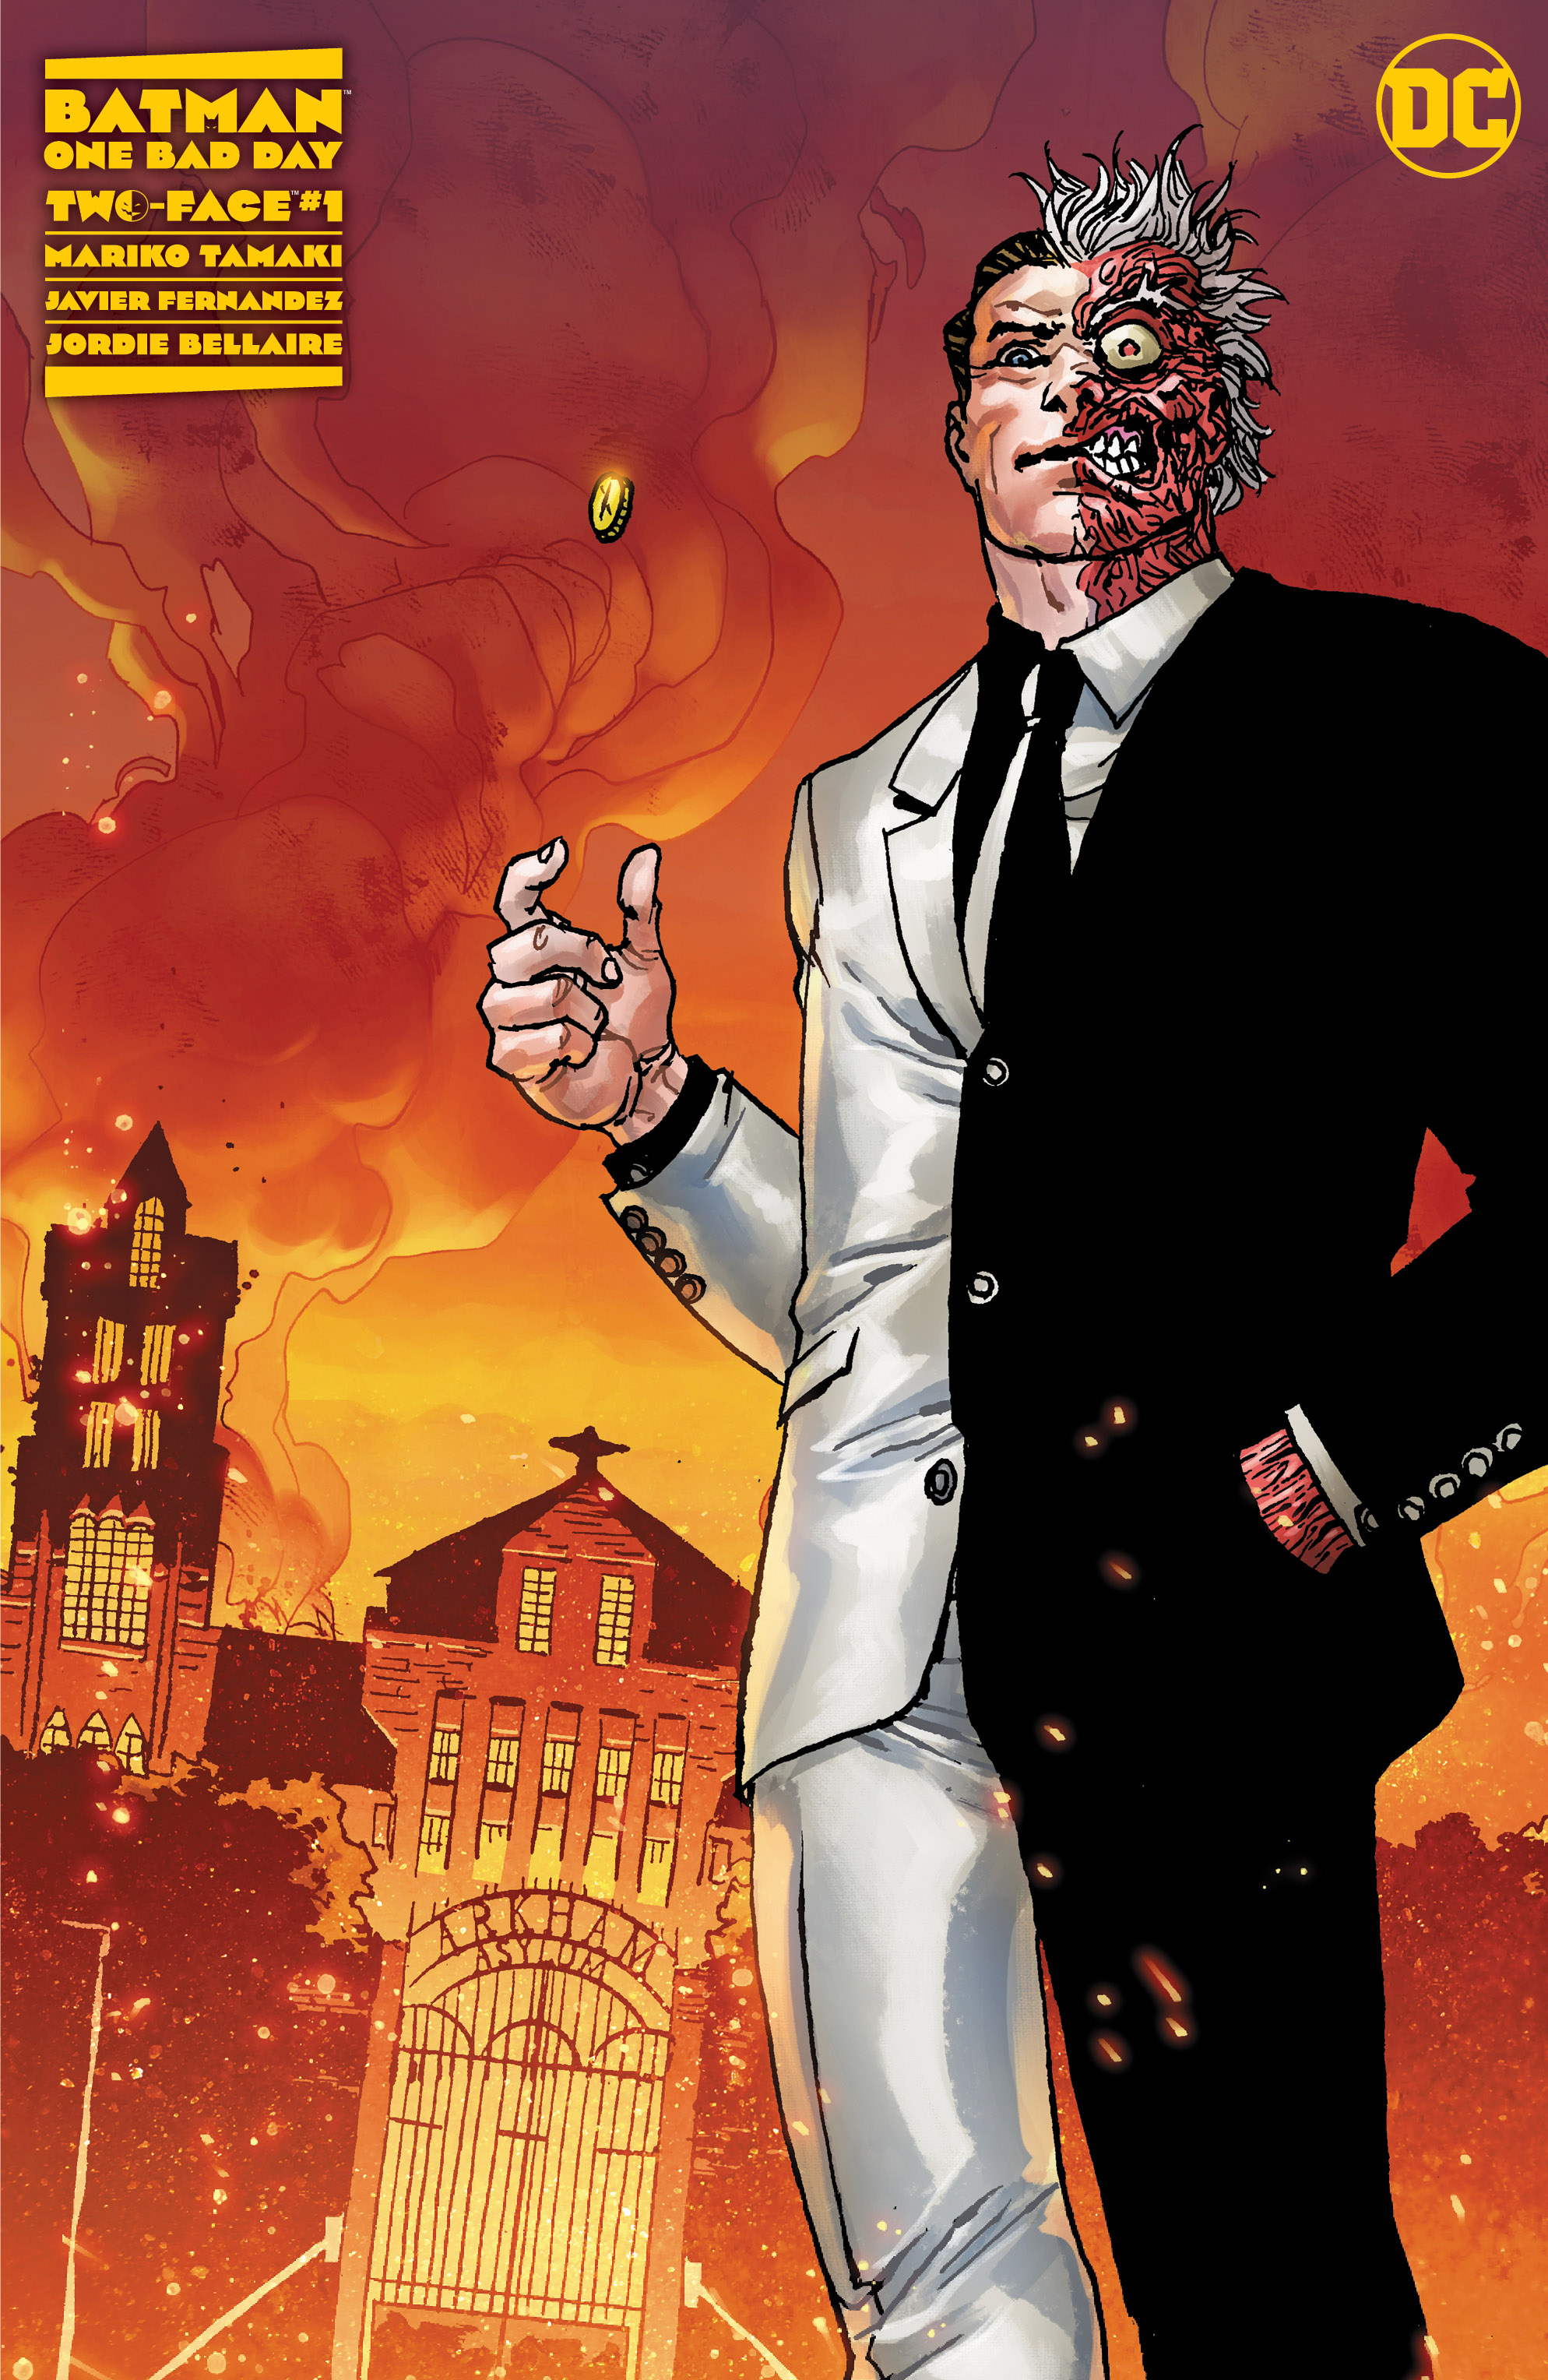 Batman One Bad Day Two-Face #1 (One Shot) Cover F Giuseppe Camuncoli Premium Variant